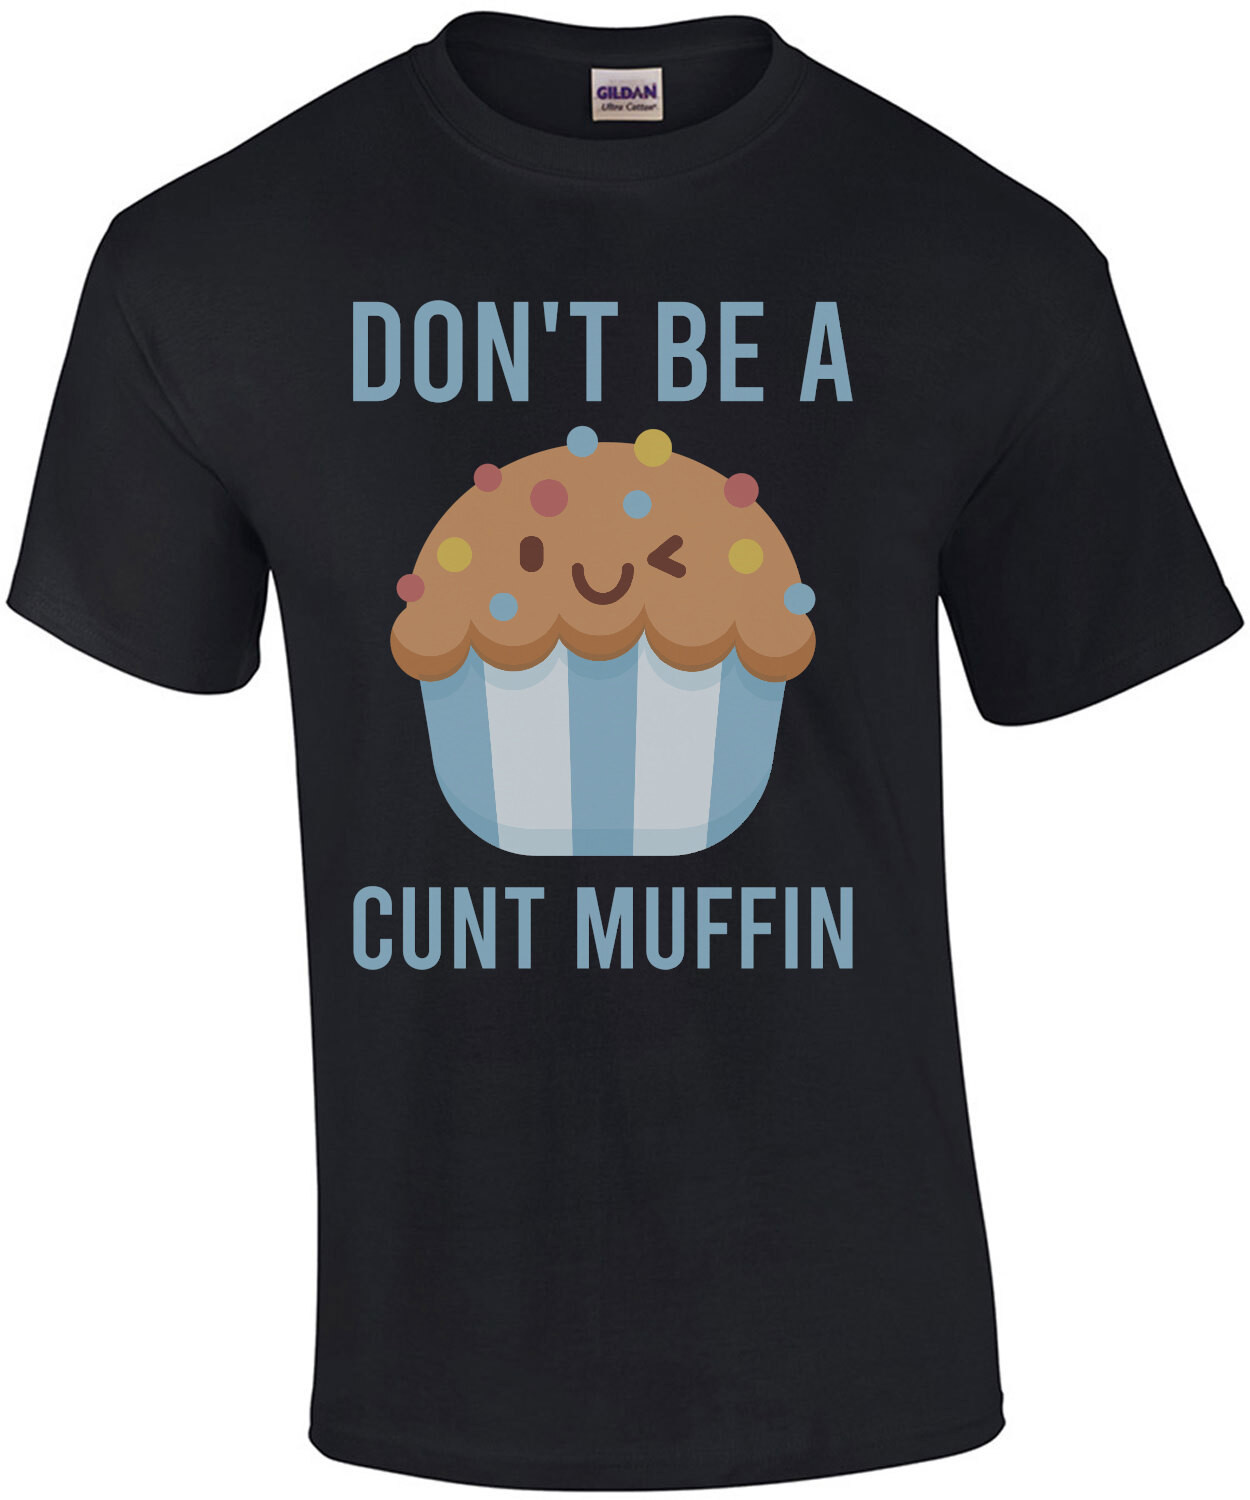 Don't be a cunt muffin - funny t-shirt